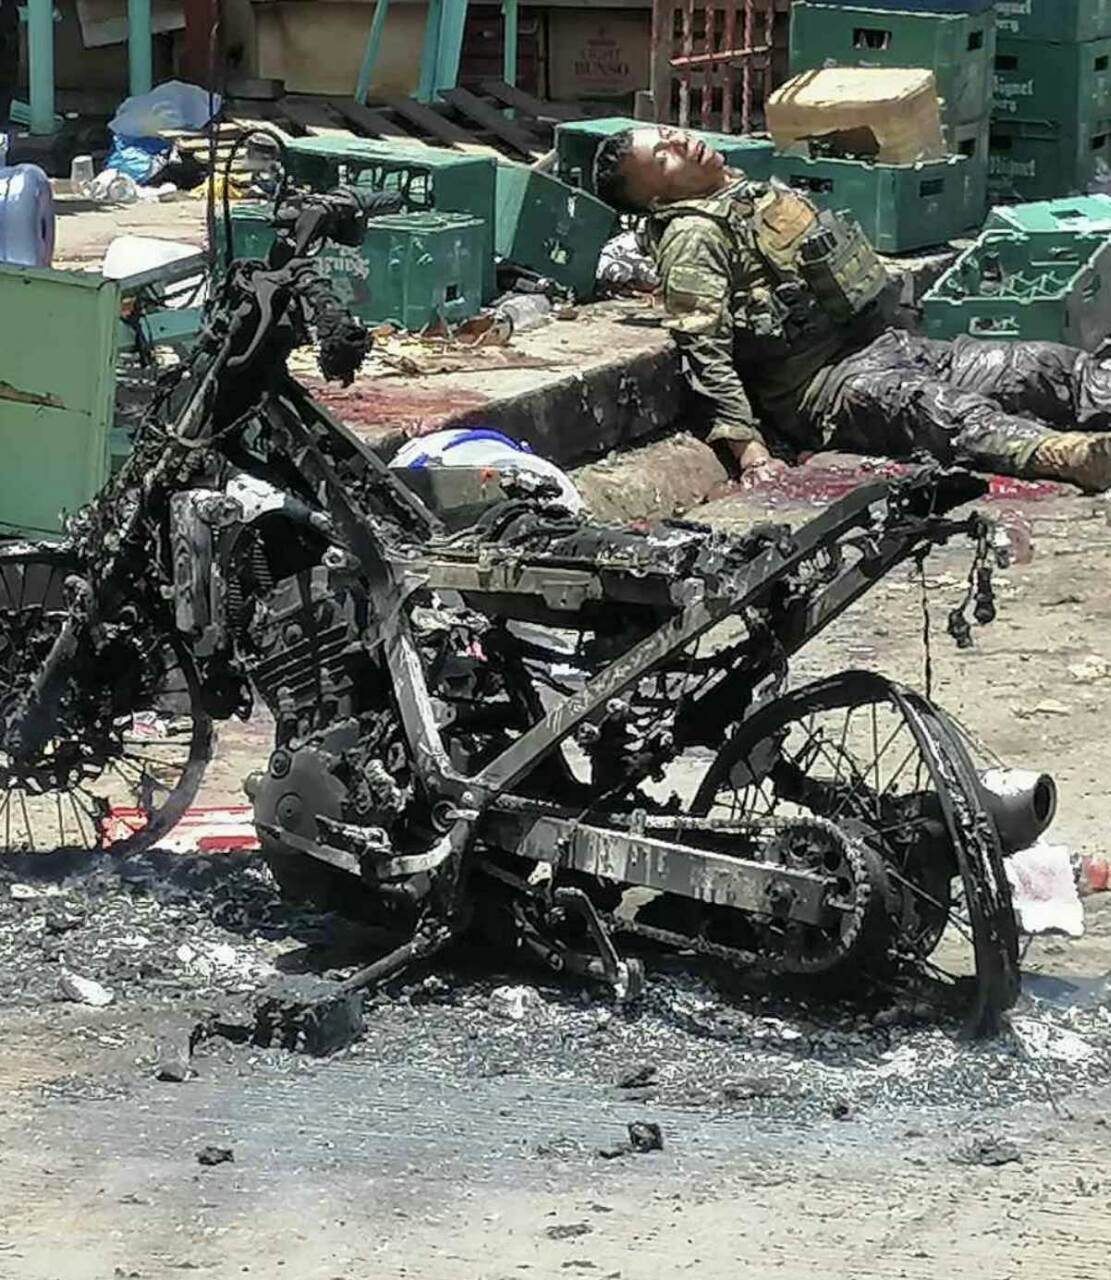 6 soldiers buying groceries when killed by first Jolo blast